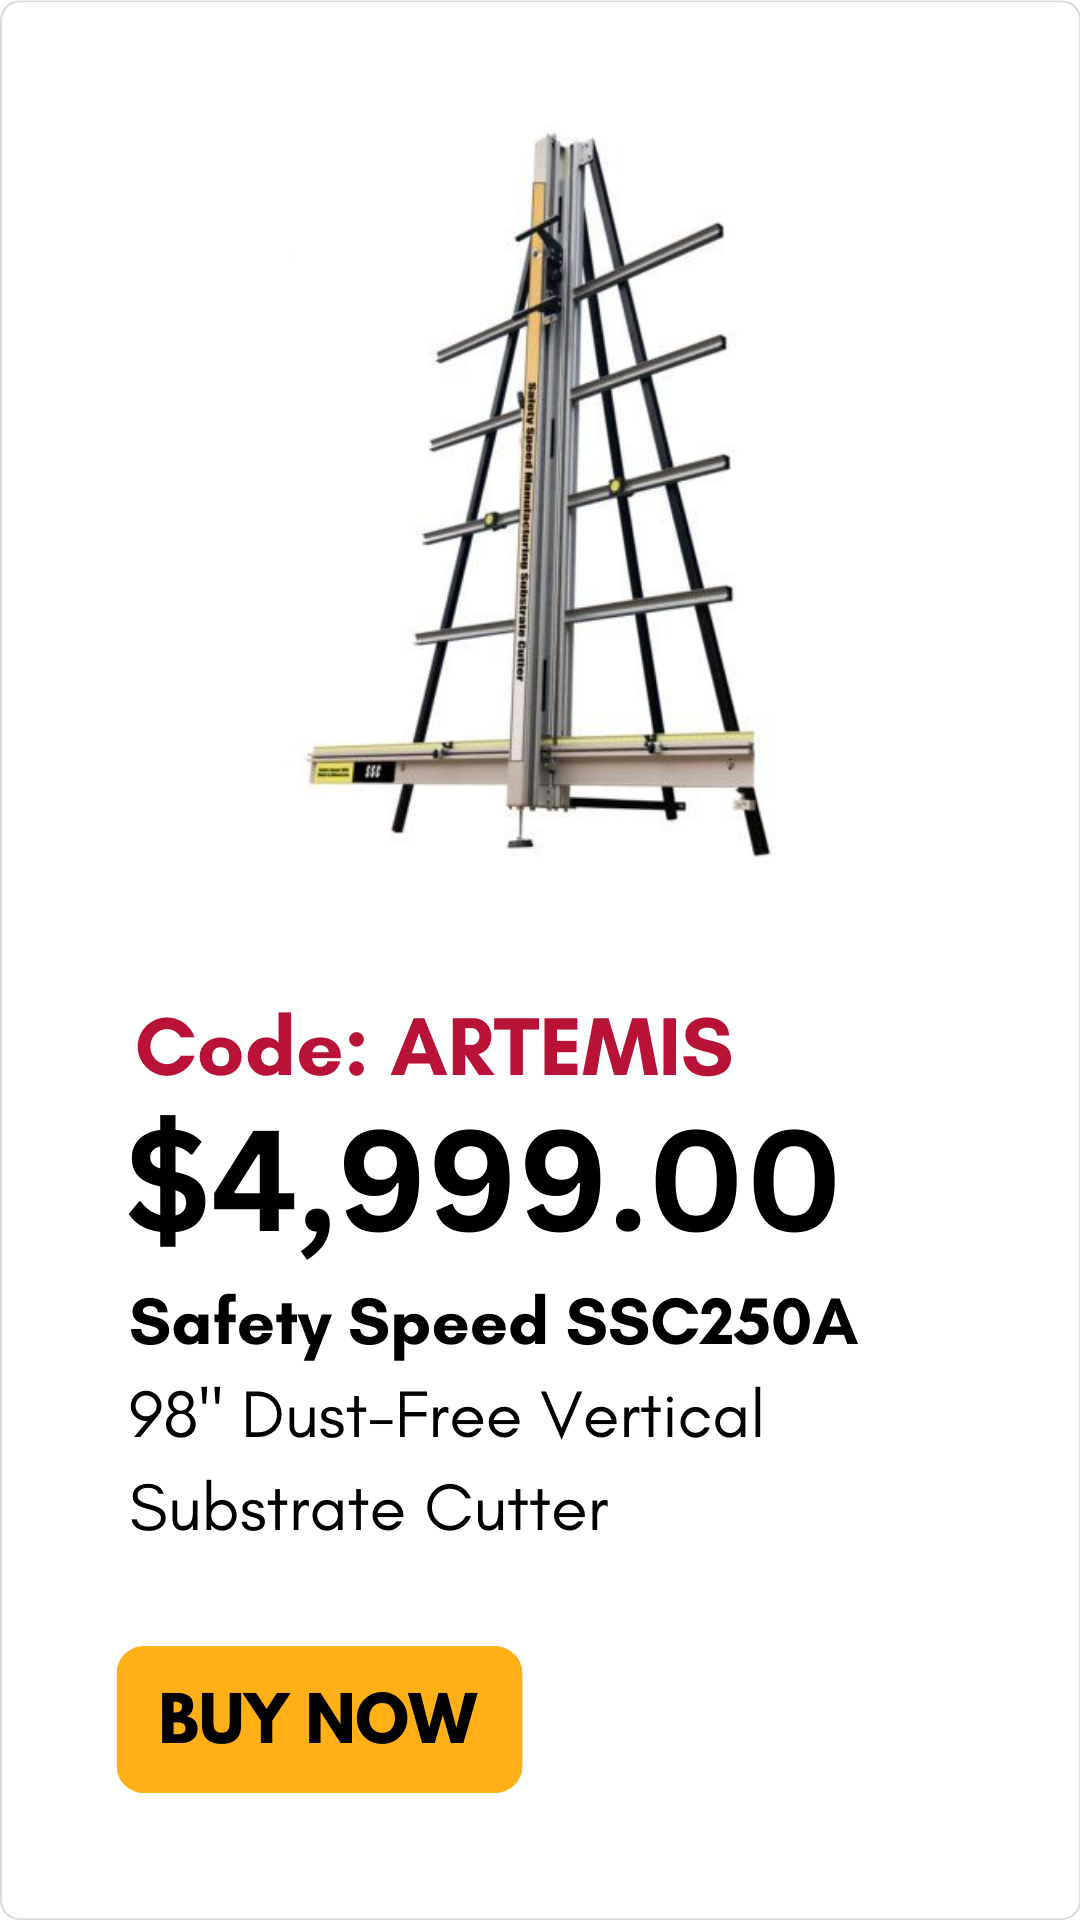 Safety Speed SSC 250A Dust-Free 98" Vertical Substrate Cutter with code ARTEMIS